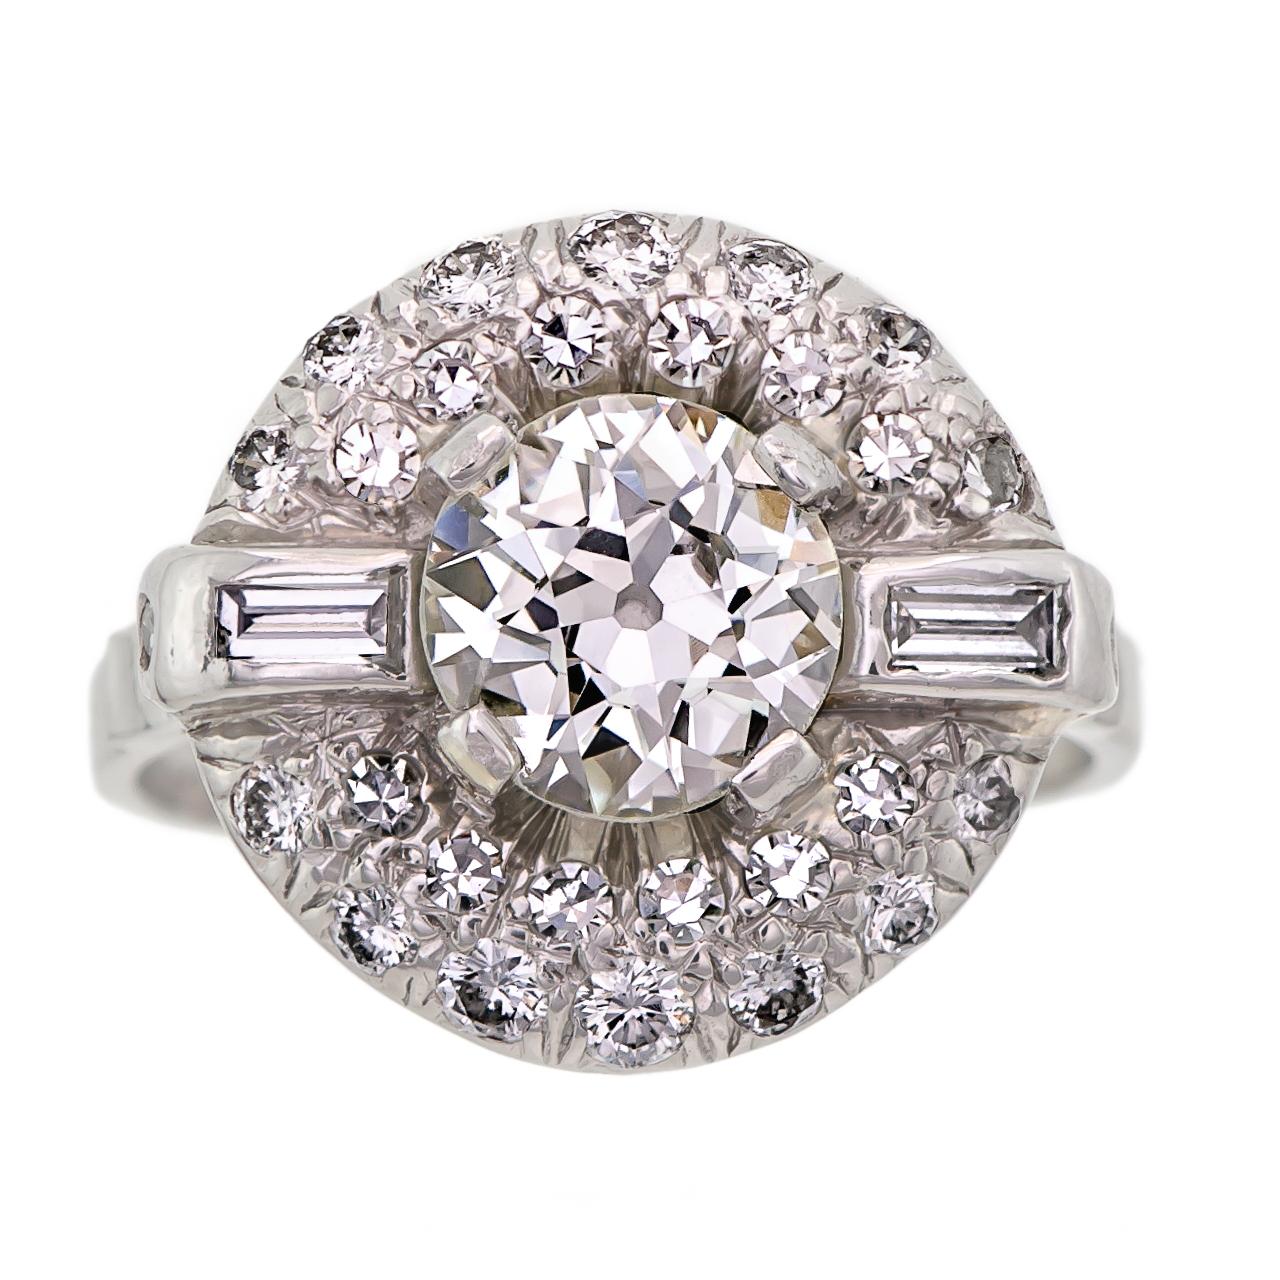 Striking Art Deco Platinum and Diamond Ring Engagement Ring For Sale